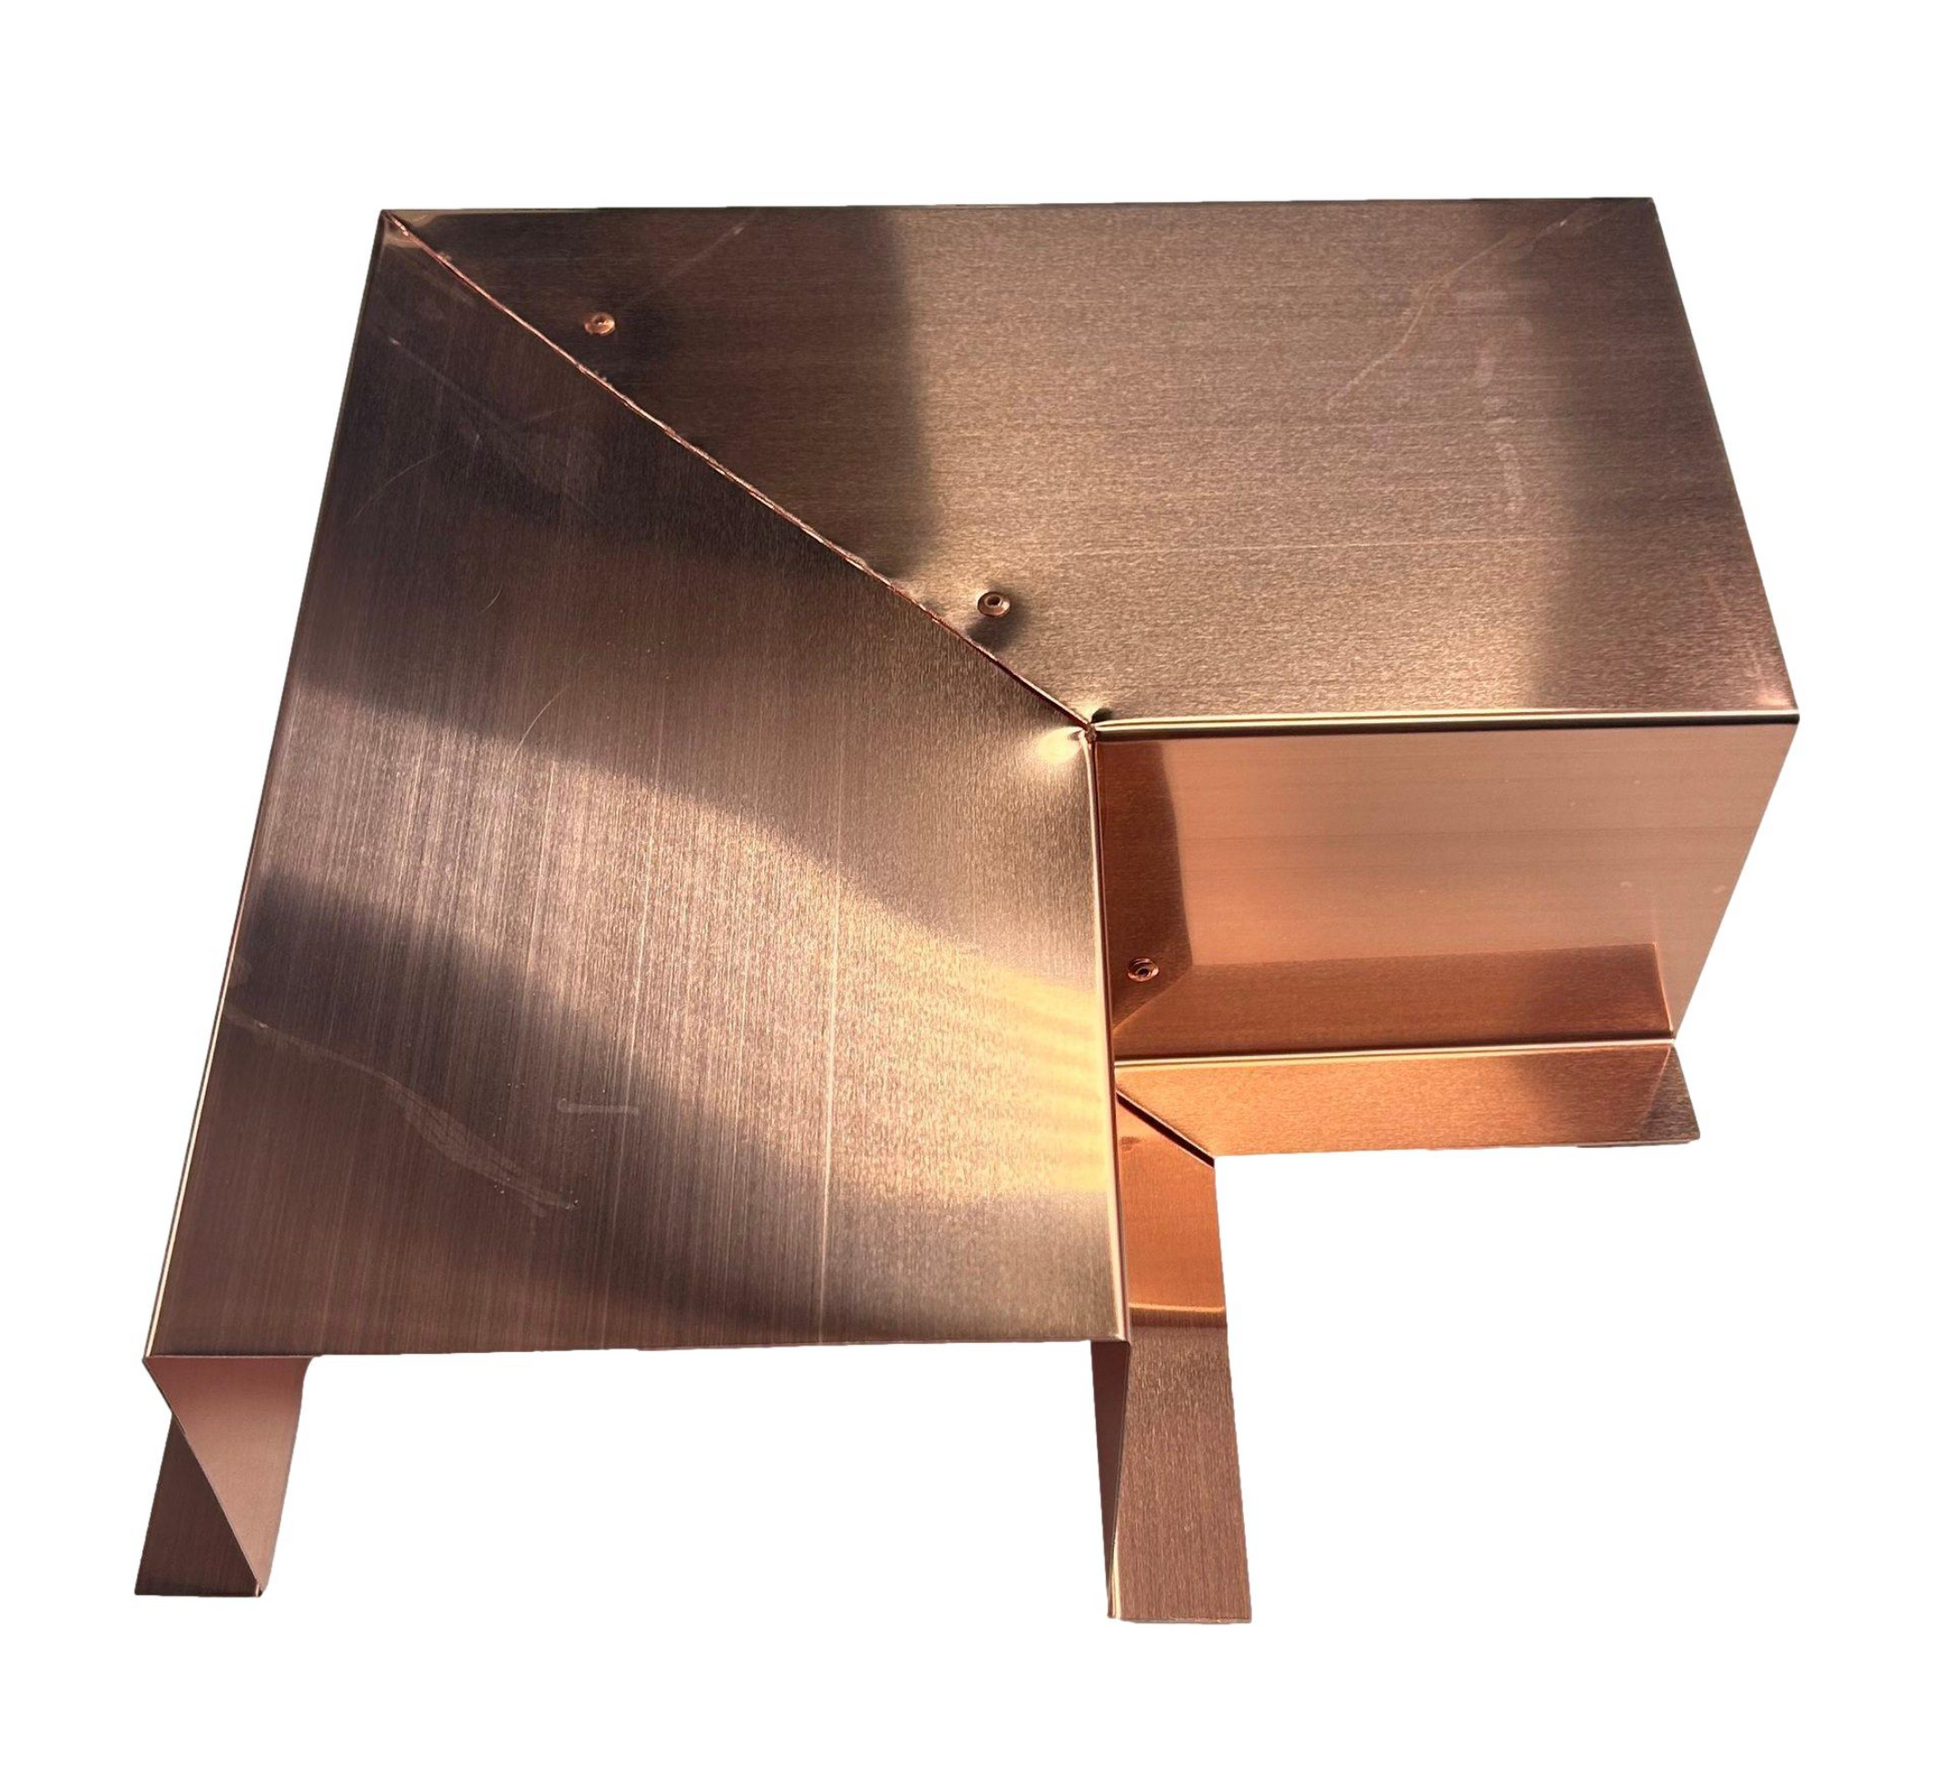 A copper-colored, geometrically designed object with angular shapes and smooth surfaces. It has an elevated base and reflective metallic finish, creating a modern and industrial aesthetic. The design ensures easy installation, complementing the premium quality Perma Cover Residential Series - Line Set Cover Side Turning Elbows - Premium Quality used in HVAC line sets.